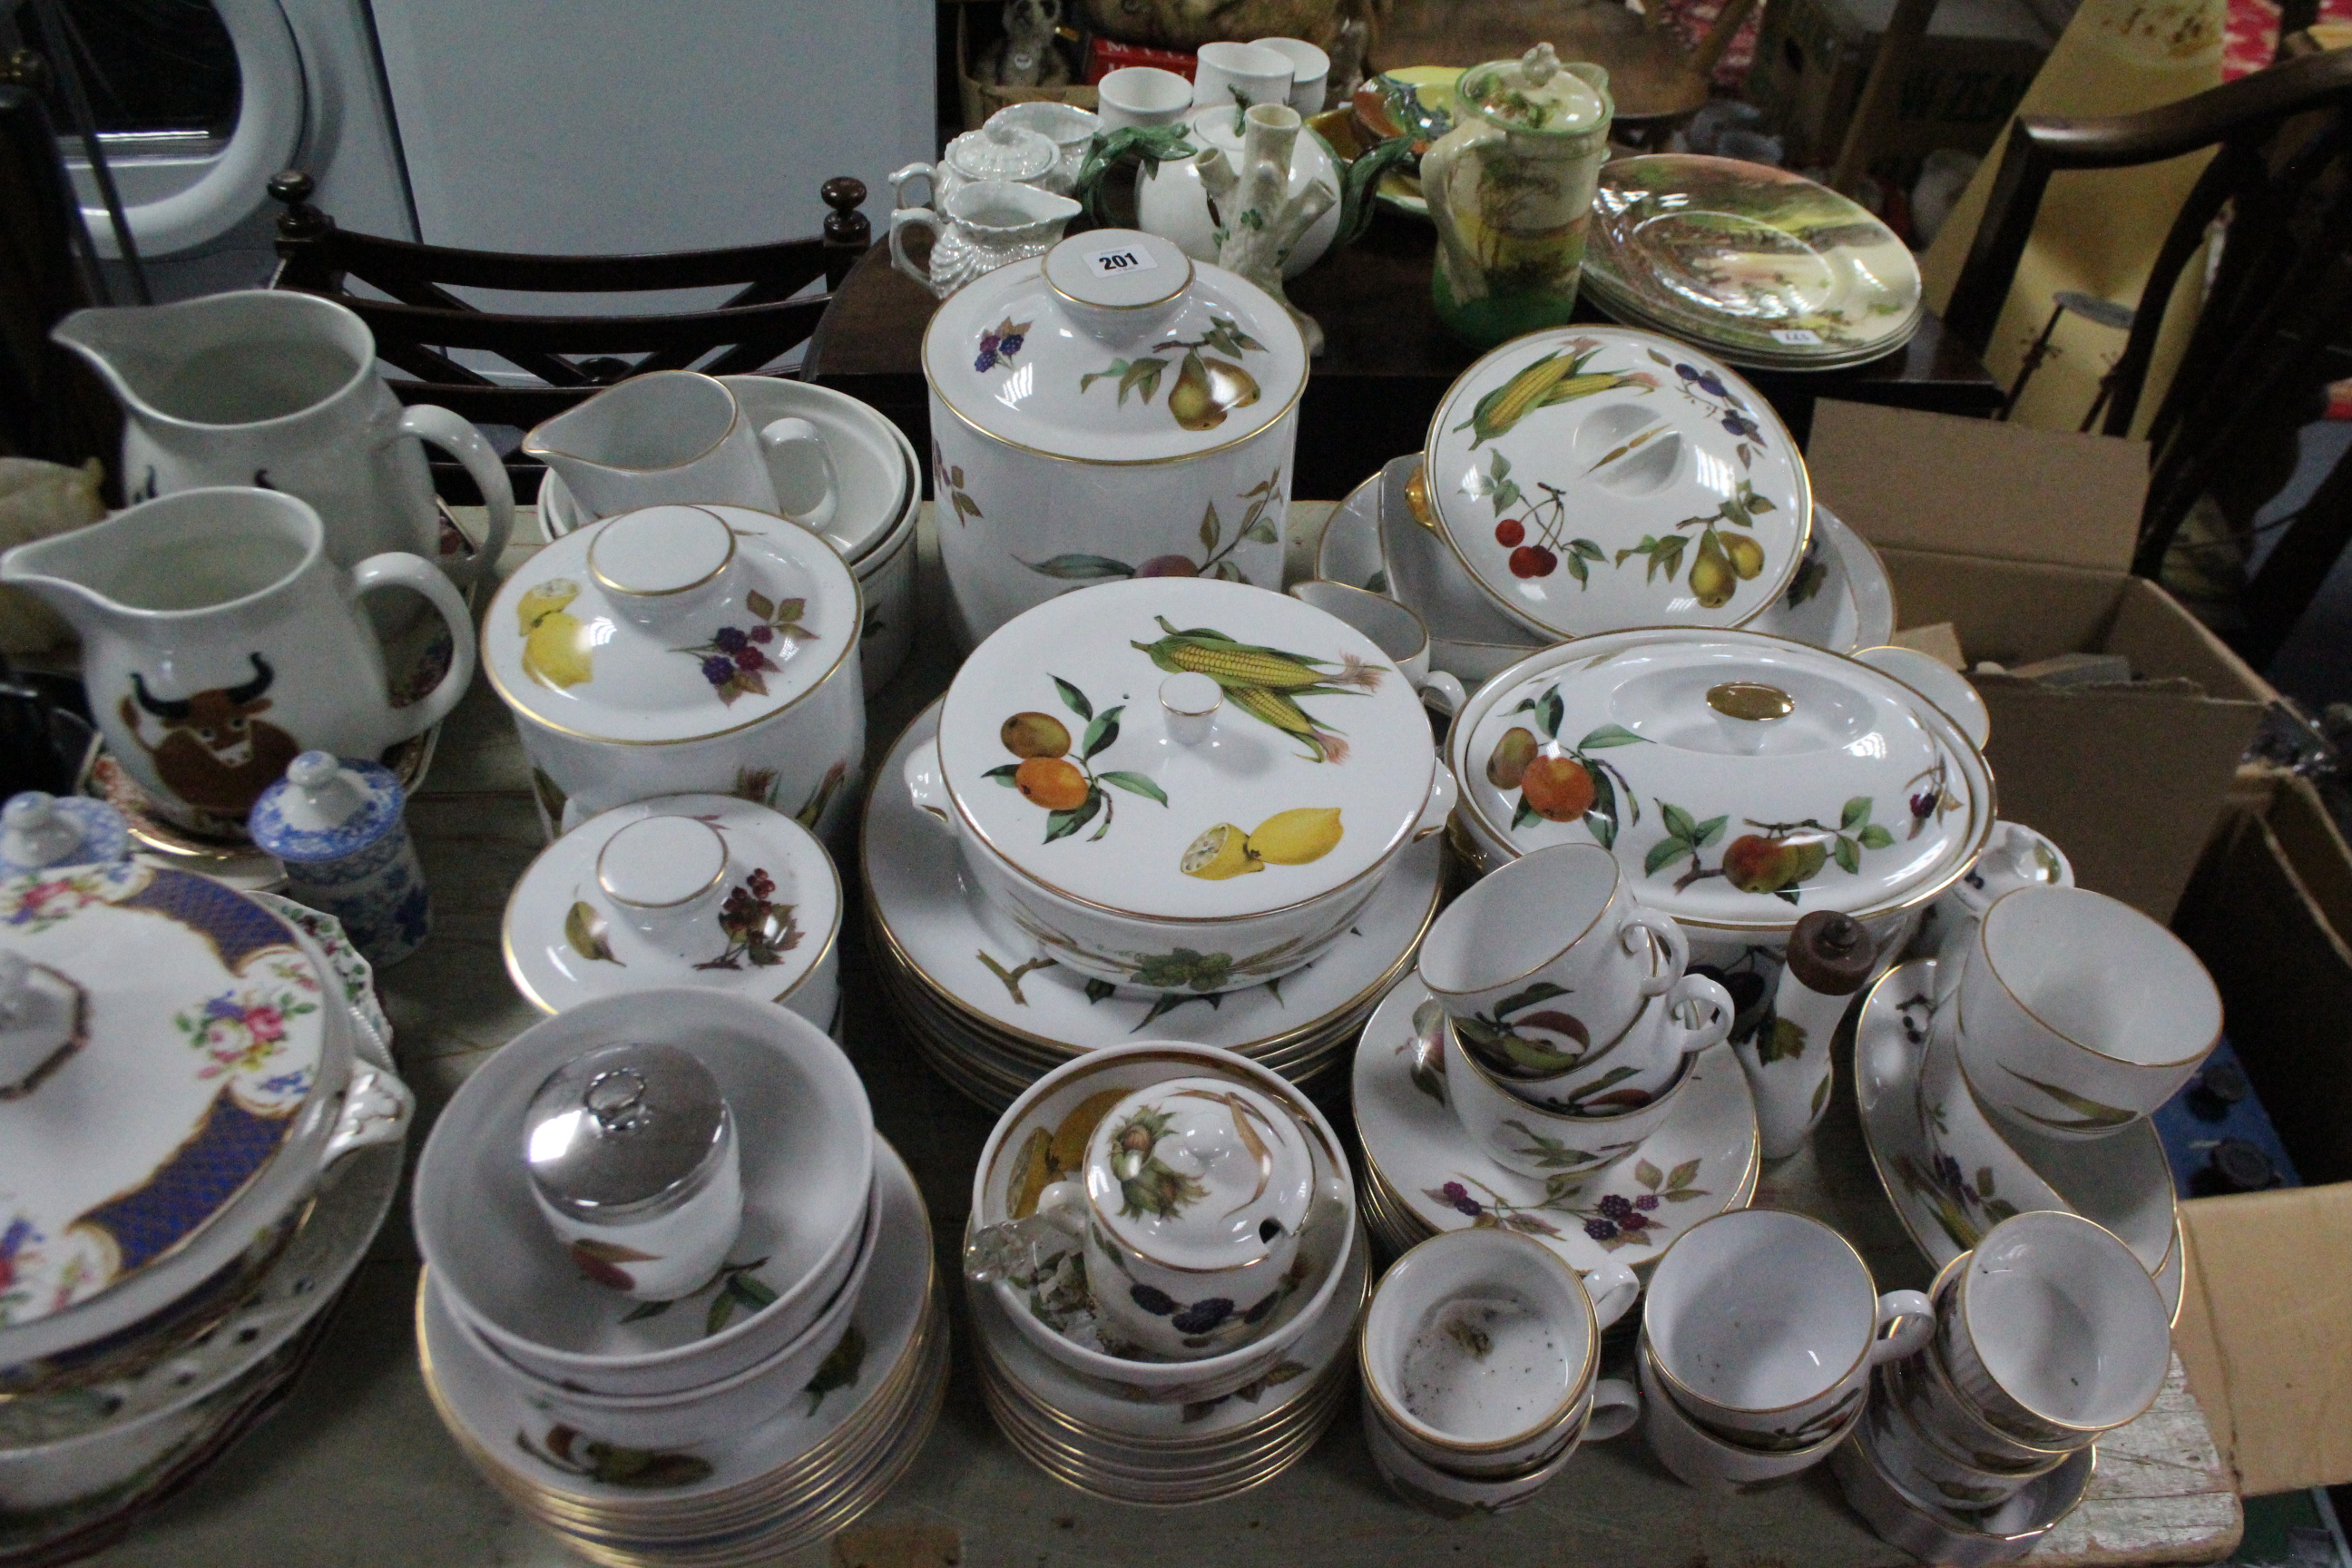 Fifty eight items of Royal Worcester “Evesham” pattern oven-to-tableware dinner, tea & kitchenware.